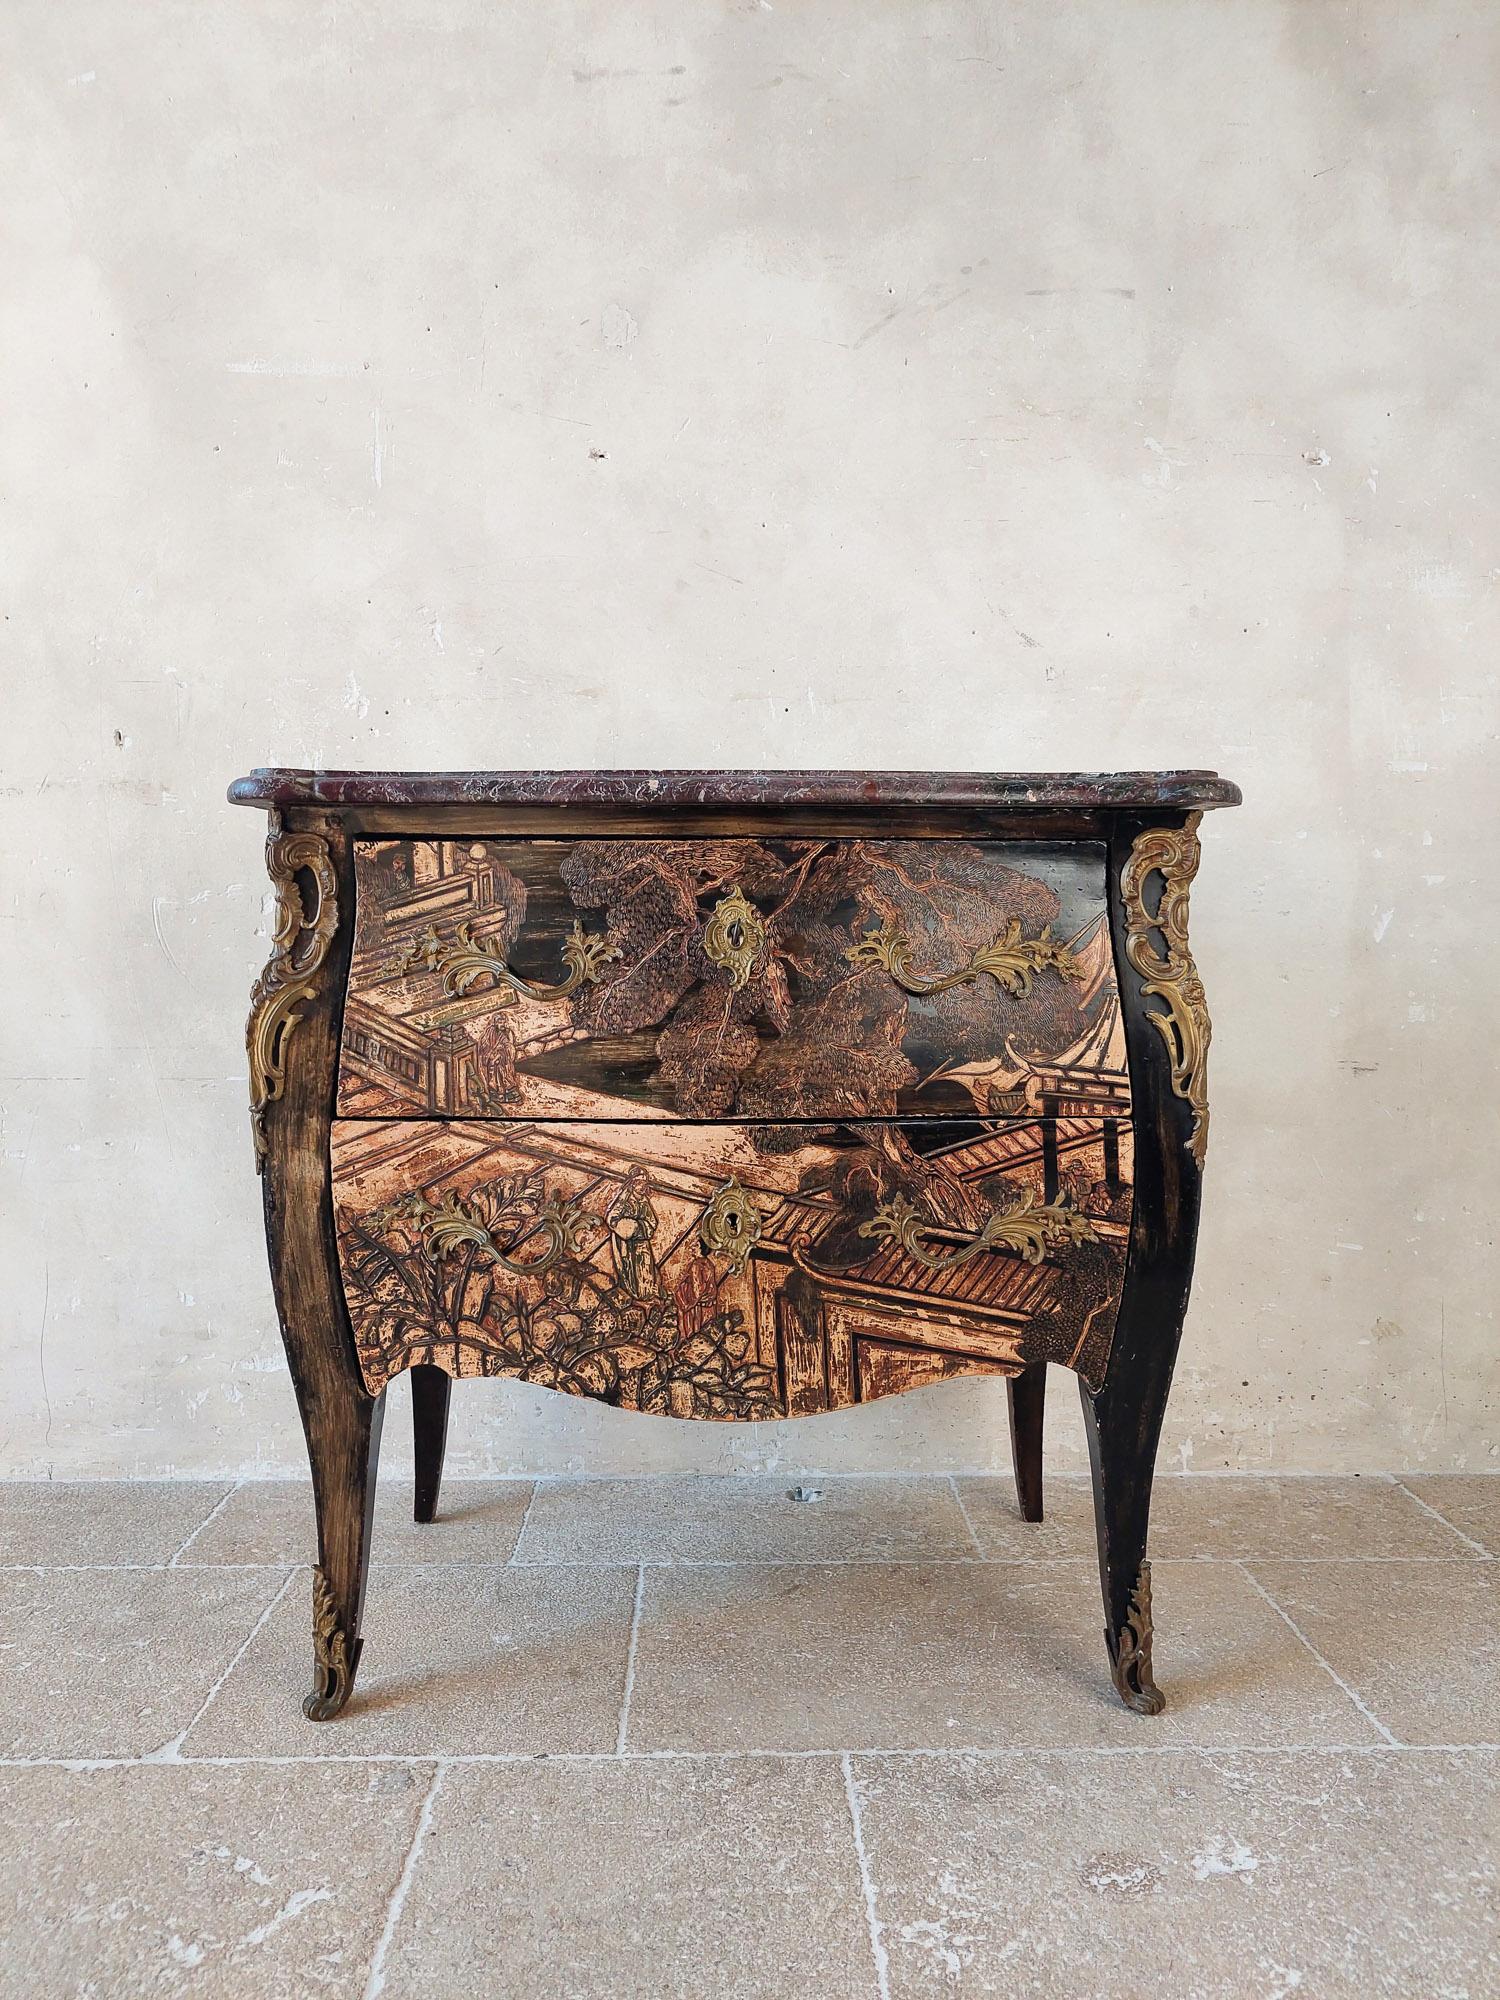 Antique French chinoiserie commode. 19th century black painted chest of drawers with carved details in shades of beige, red and green. With beautifully shaped brass details on the corners and the front feet, the closures and handles. The red marble